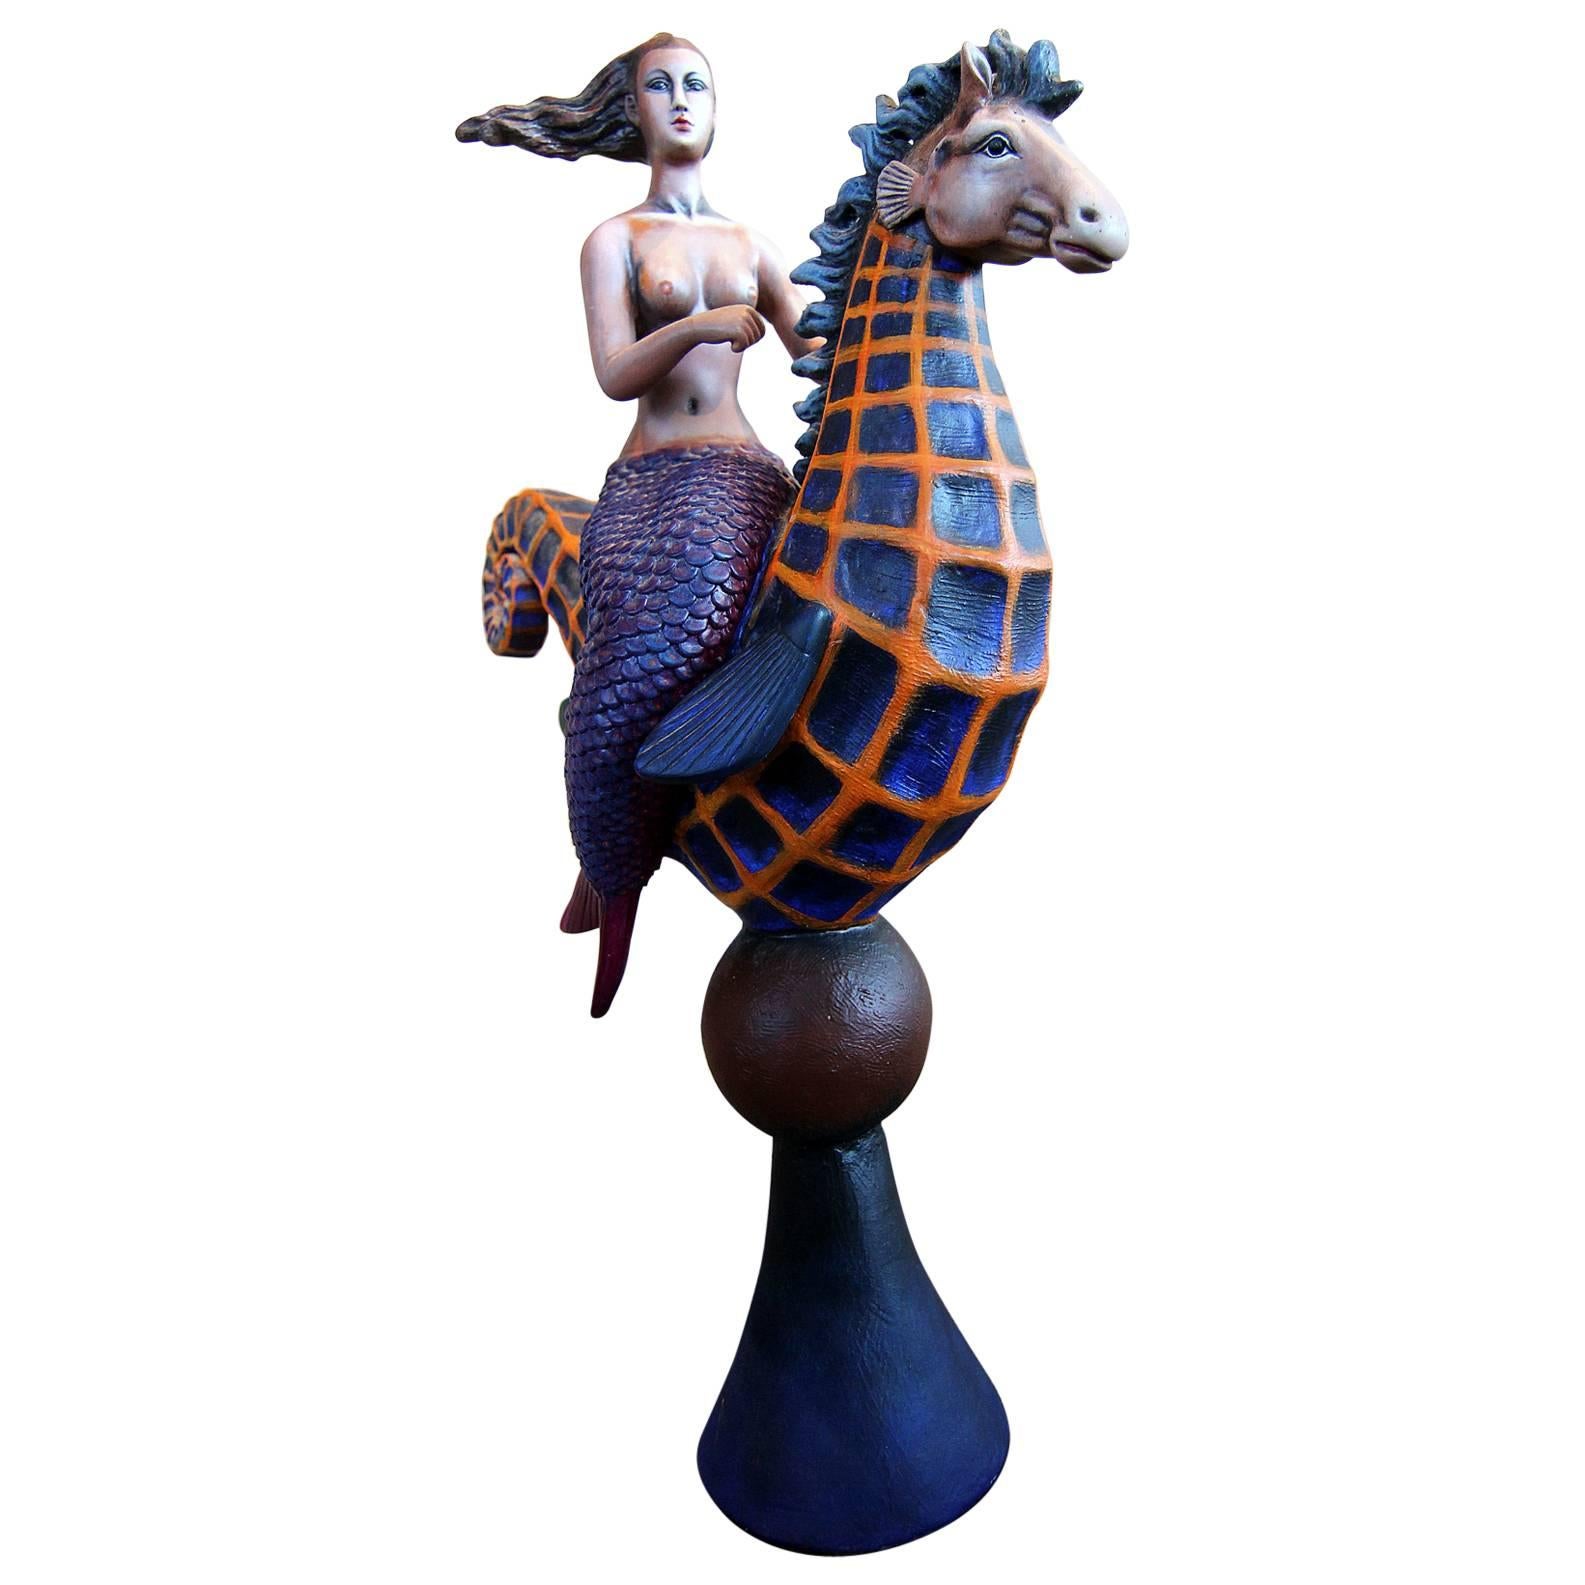 Whimsical Mermaid Riding Seahorse Sculpture by Sergio Bustamante